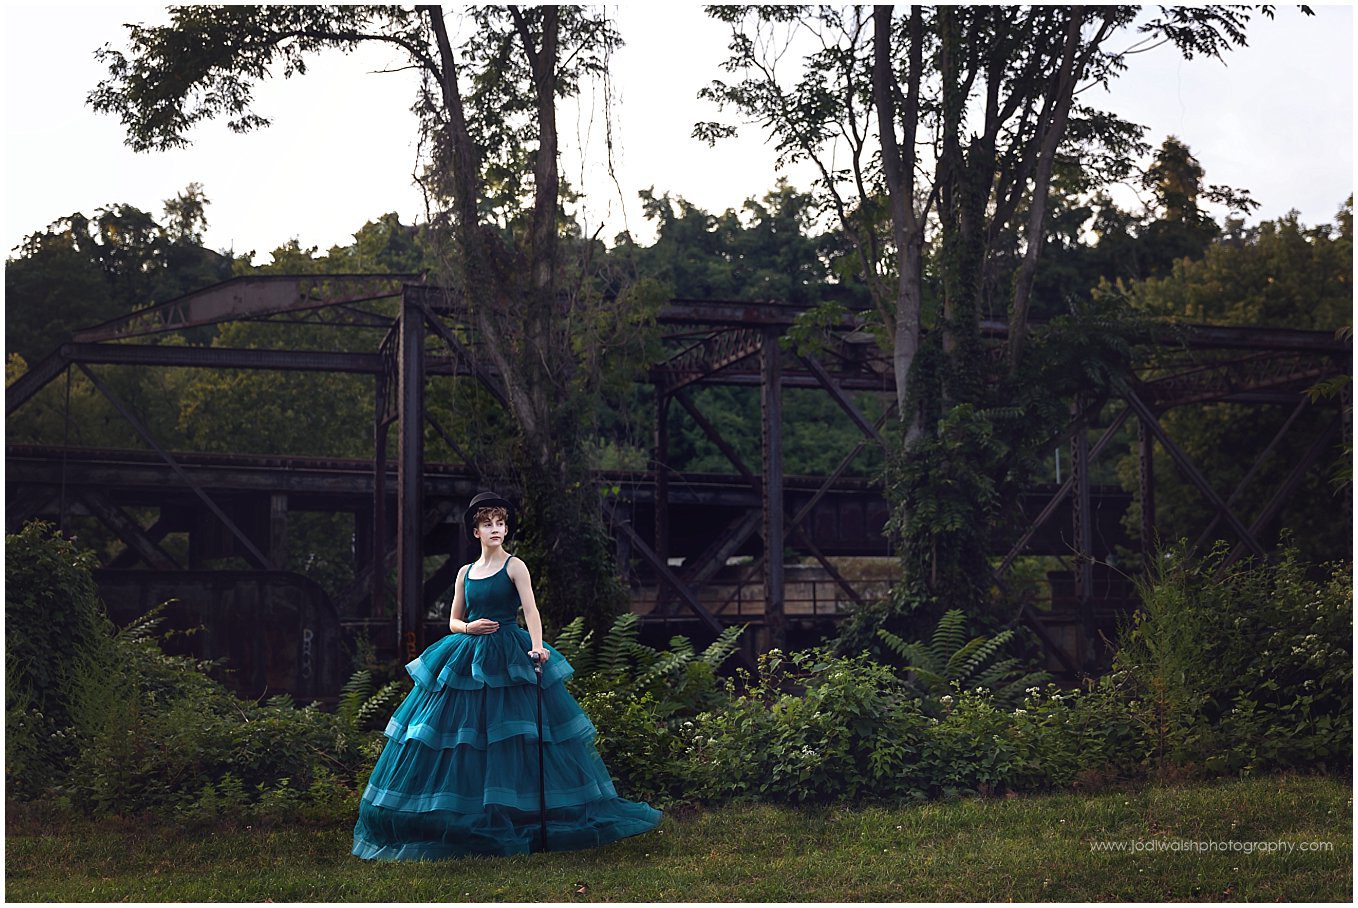 image of a teen wearing a teal gown with a black op hat.  They're standing in front of a rusted train trestle overgrown with trees and vines.